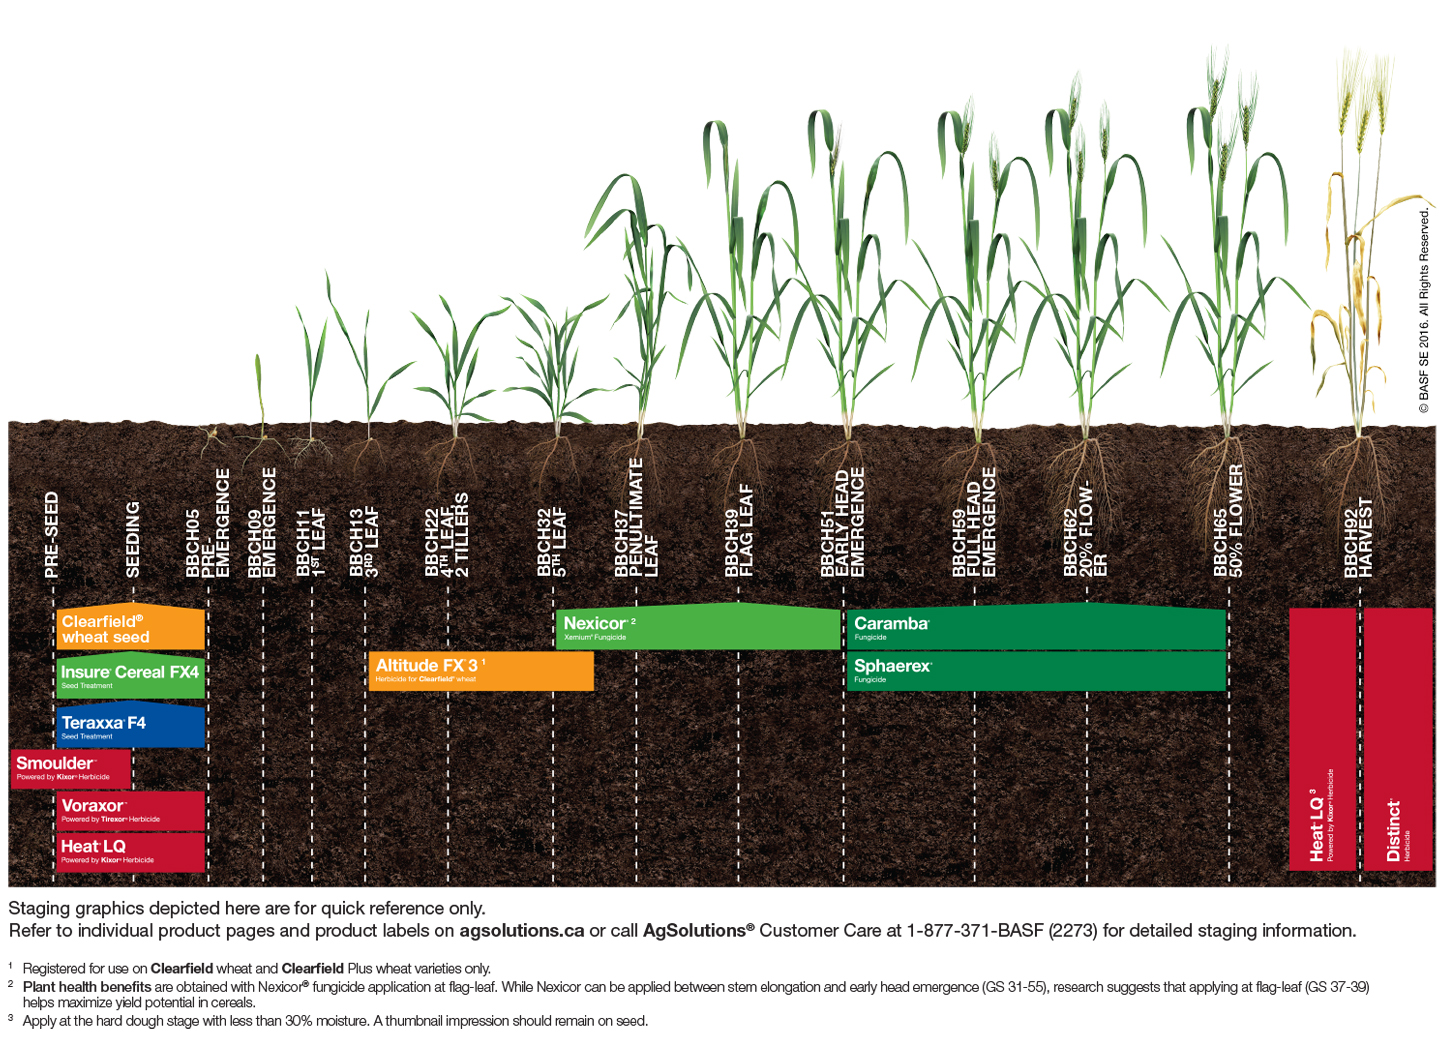 Wheat crop staging guide